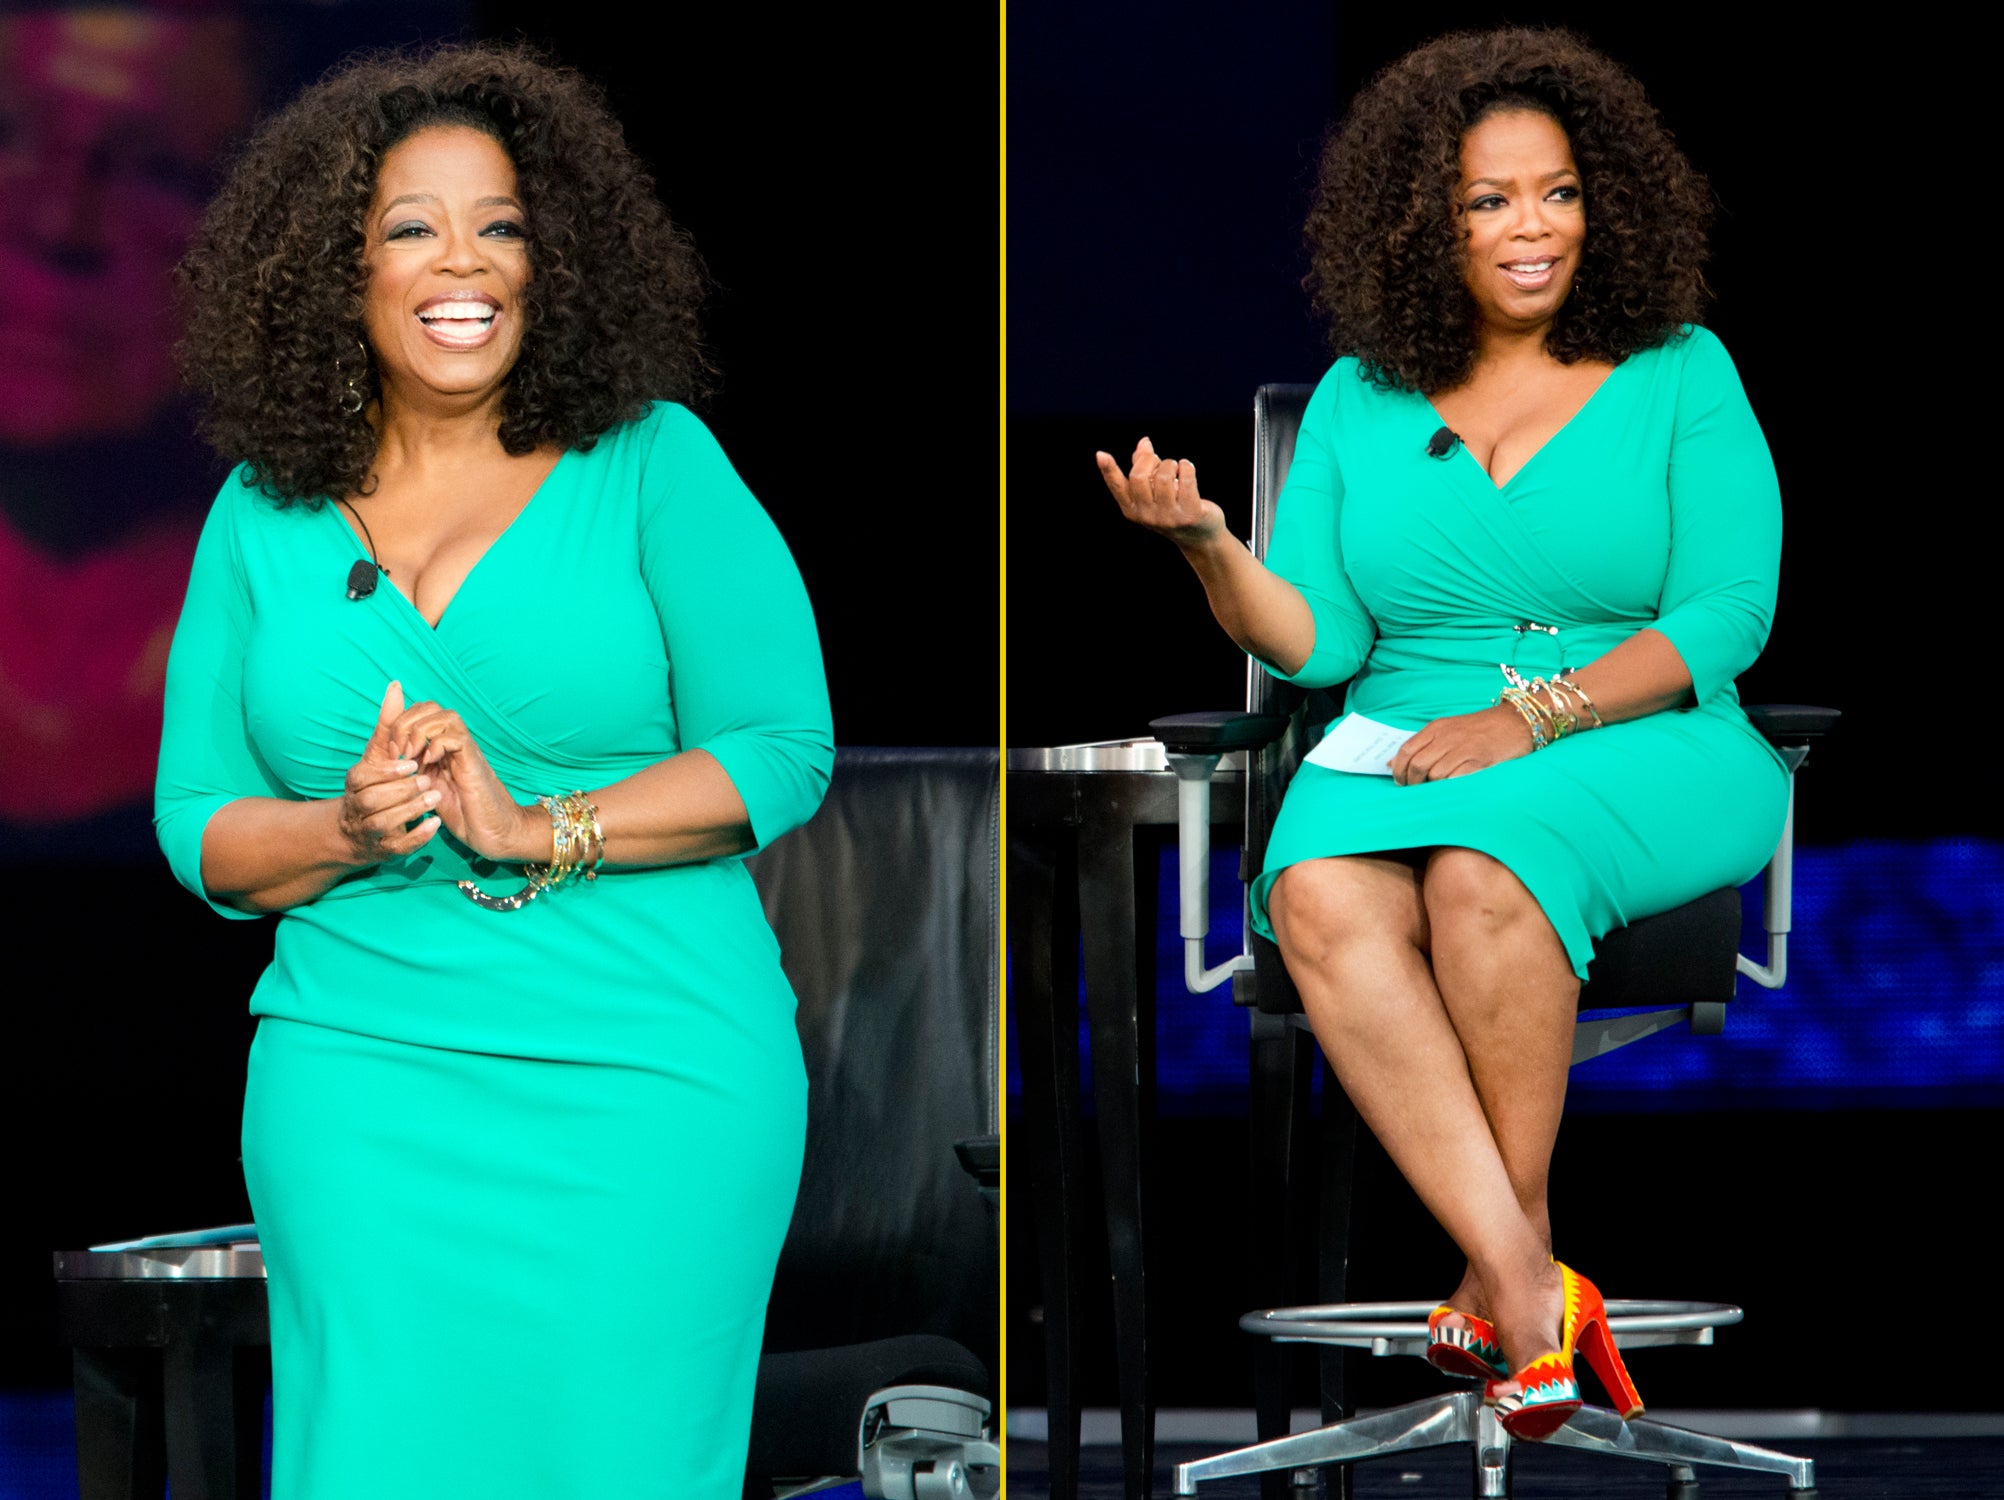 Coffee Talk: Oprah Winfrey to Receive Leadership Award From The Hollywood Reporter